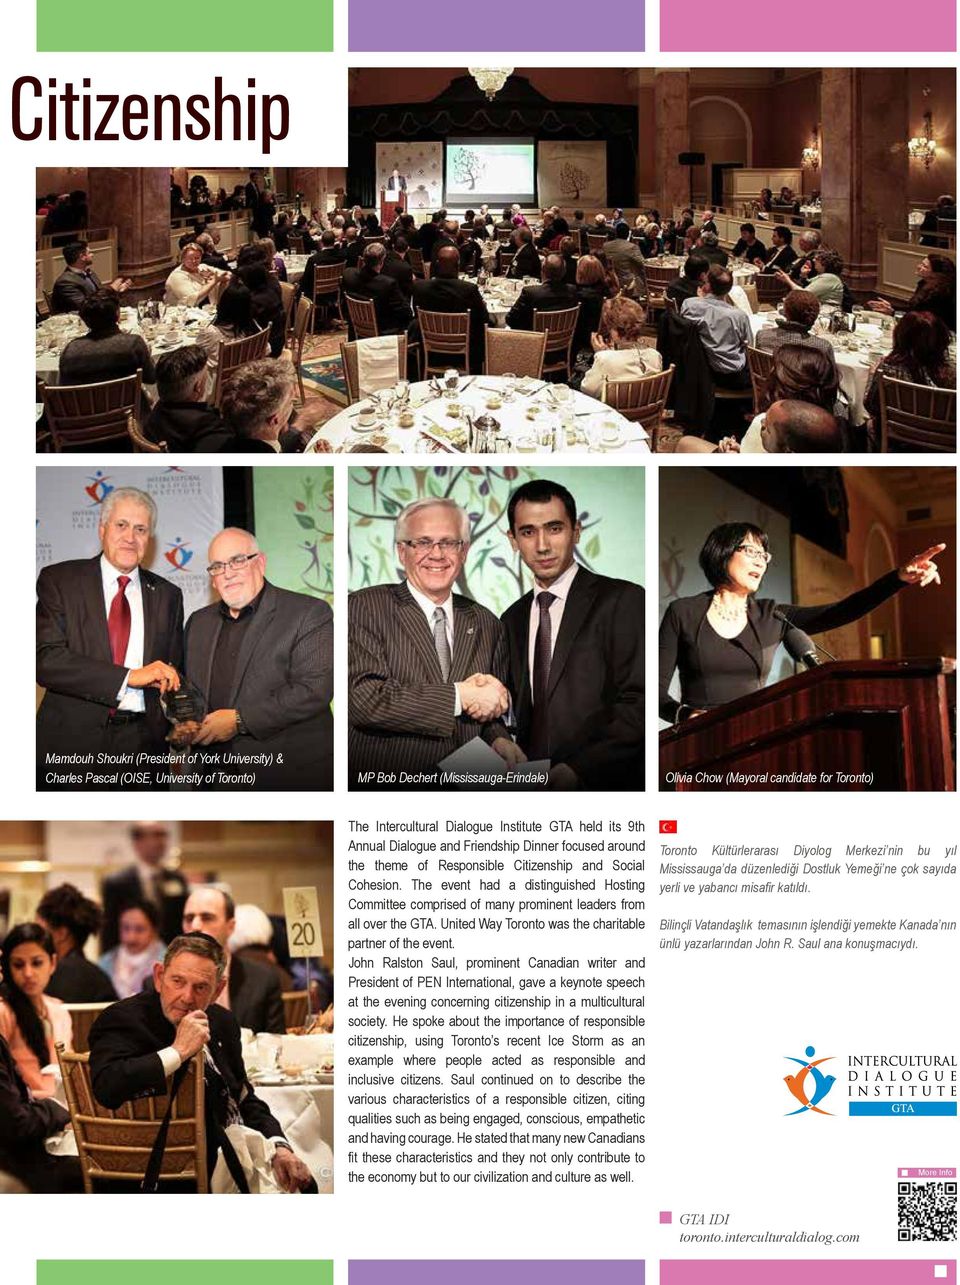 The event had a distinguished Hosting Committee comprised of many prominent leaders from all over the GTA. United Way Toronto was the charitable partner of the event.